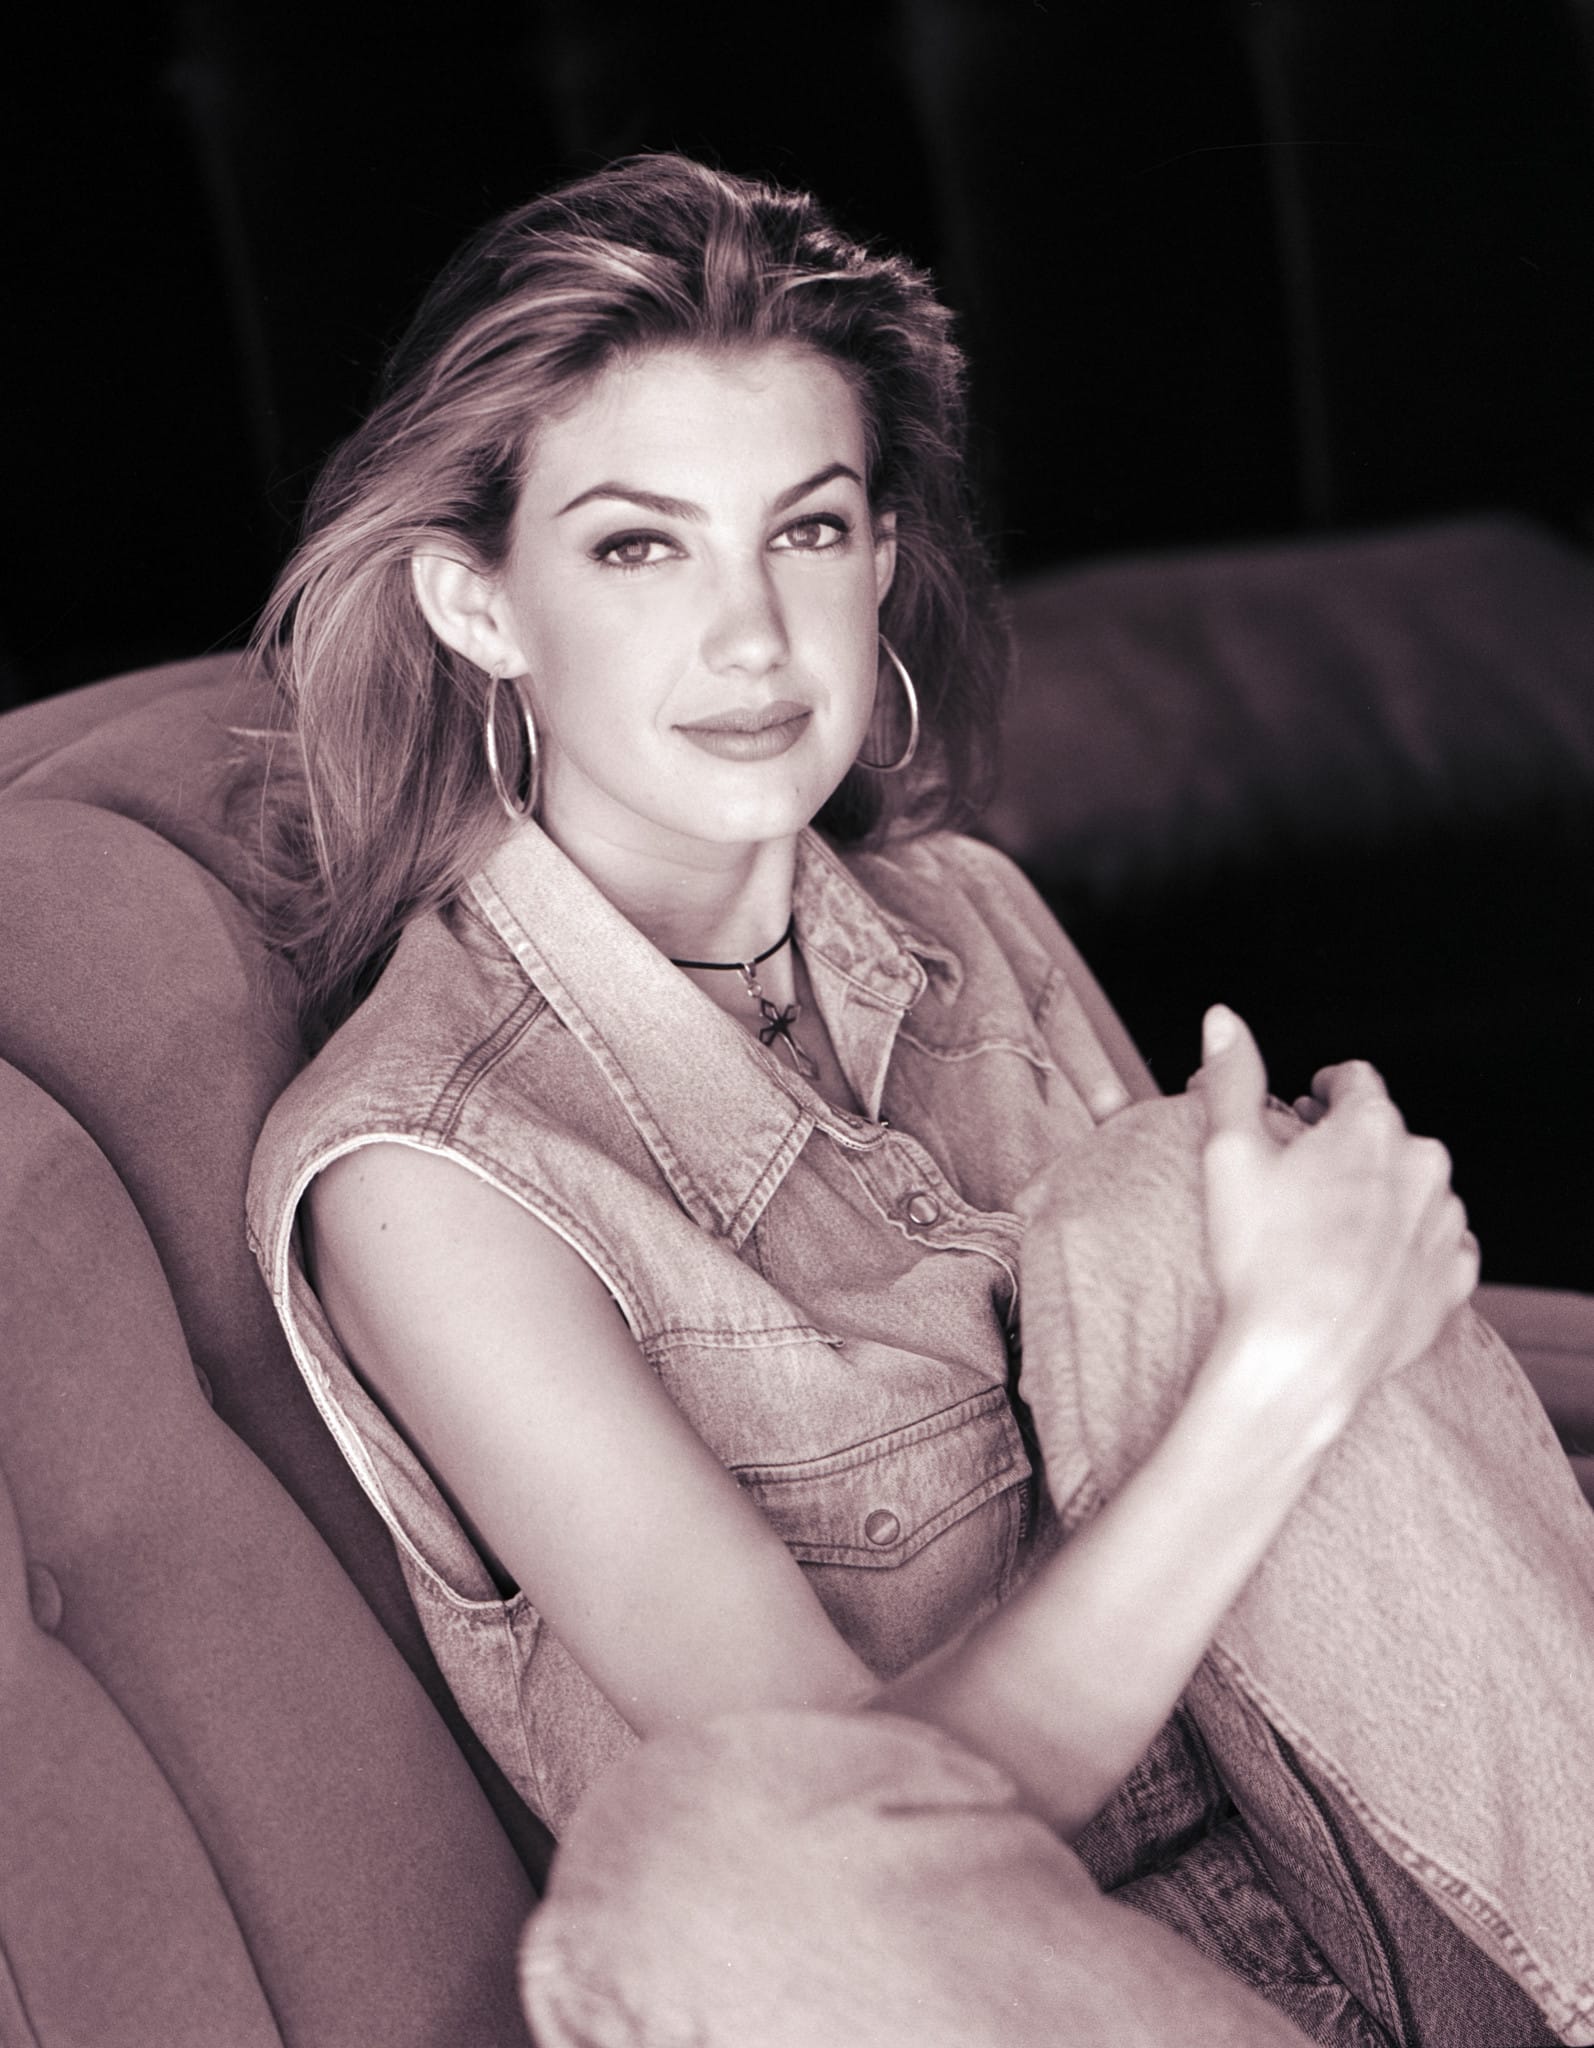 Los Angeles - CIRCA 1993: Singer Faith Hill poses for a portrait circa 1993 in Los Angeles, California (Photo by Aaron Rapoport/Corbis/Getty Images)